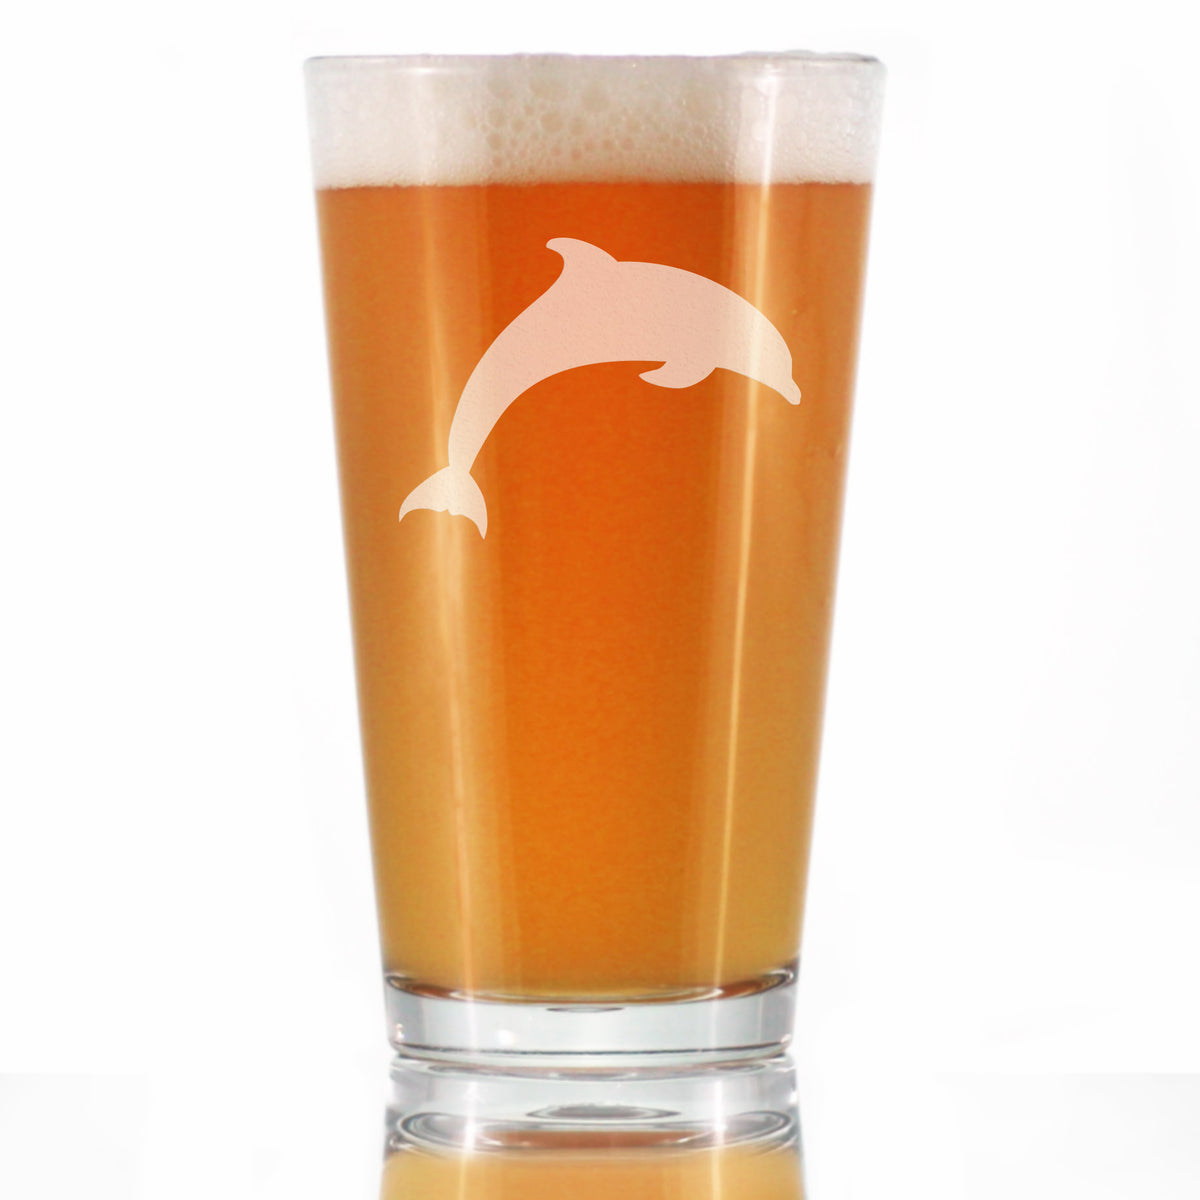 Dolphin - 16 oz Pint Glass for Beer - Cute Dolphin Themed Gifts or Party Decor for Women &amp; Men - Fun Drinking Glasses